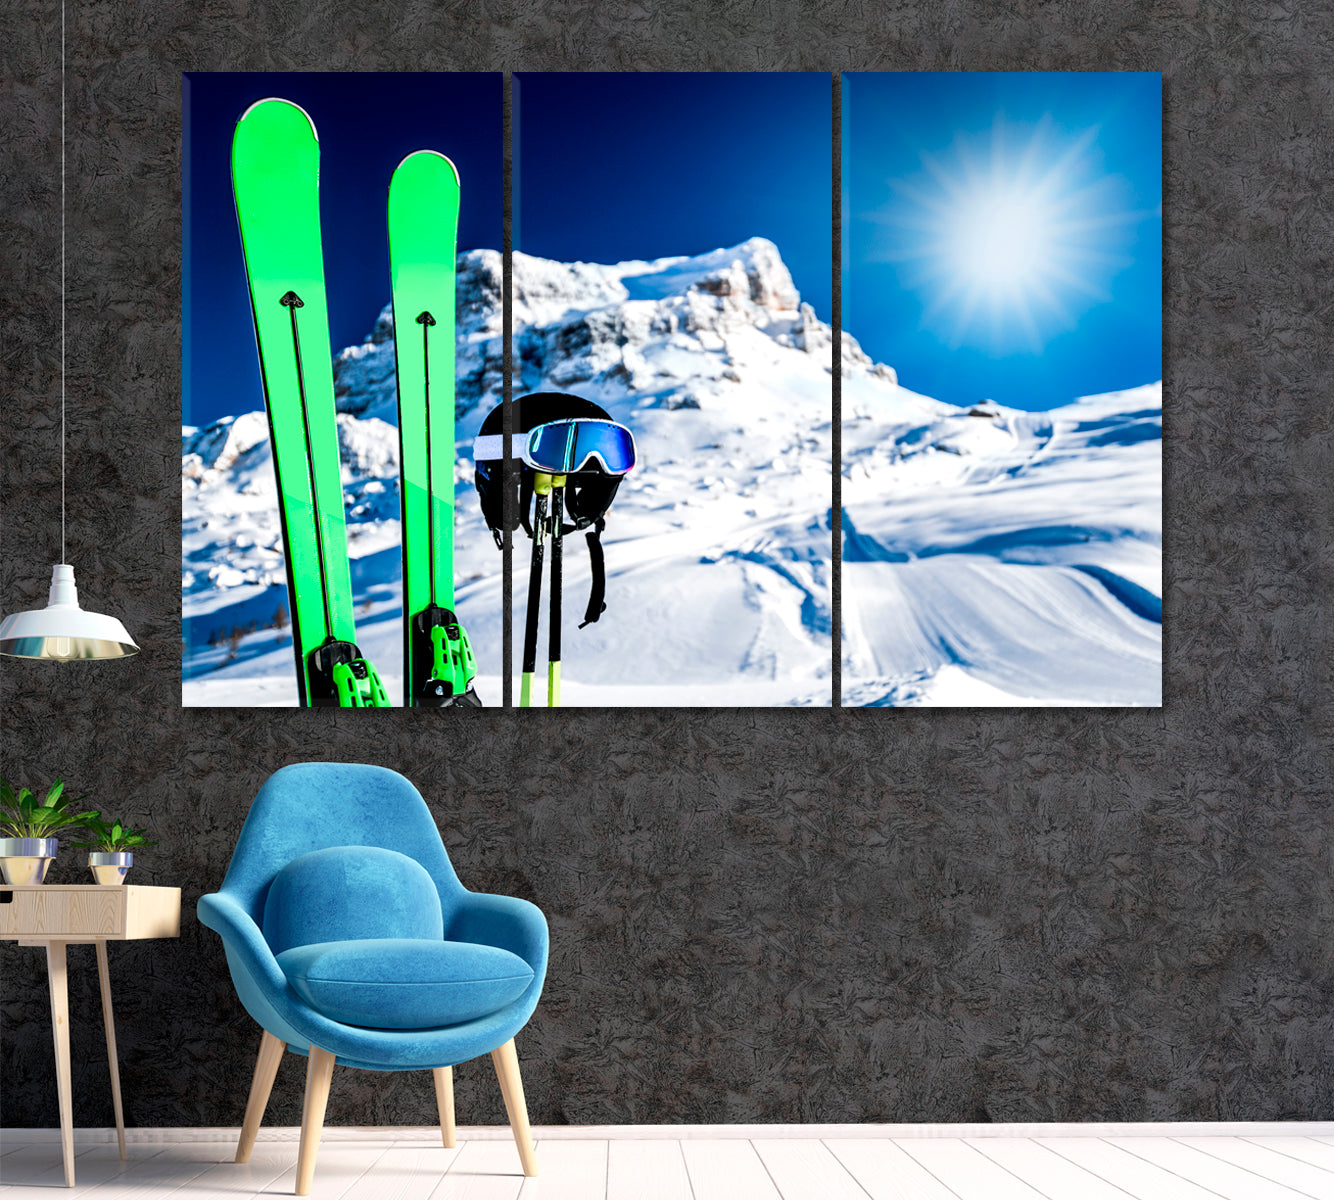 Skis in Snow Canvas Print ArtLexy 3 Panels 36"x24" inches 